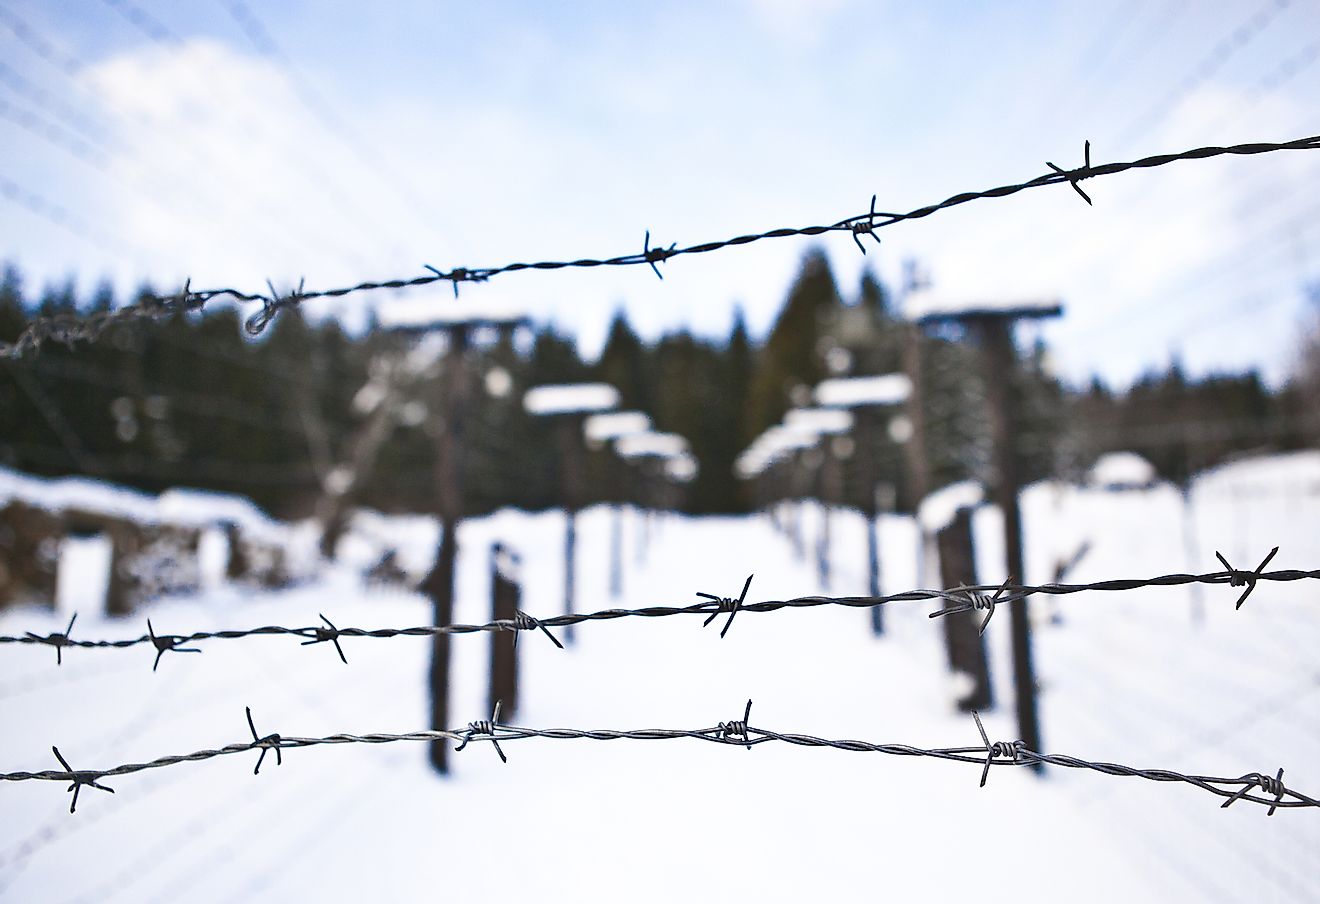 Remains of the Iron Curtain on the Czech-German border.